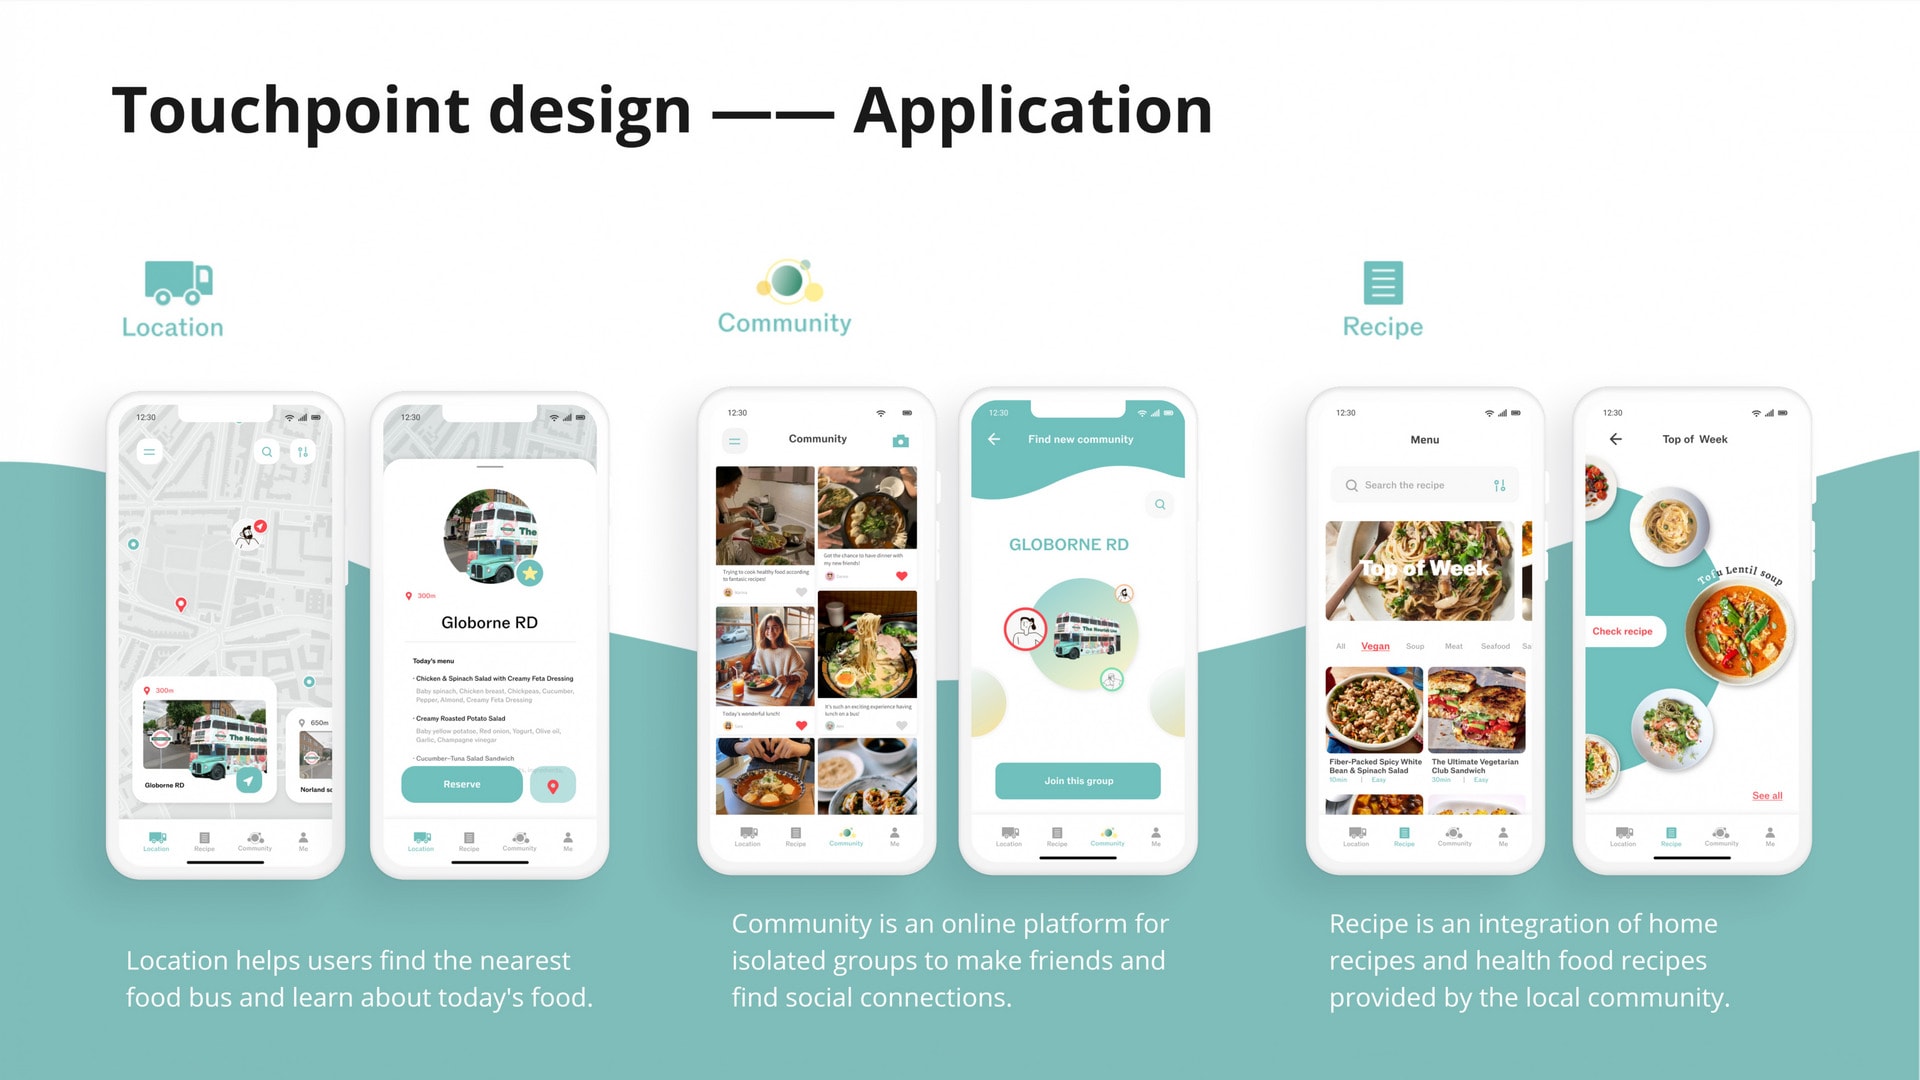 Touchpoint design—Application